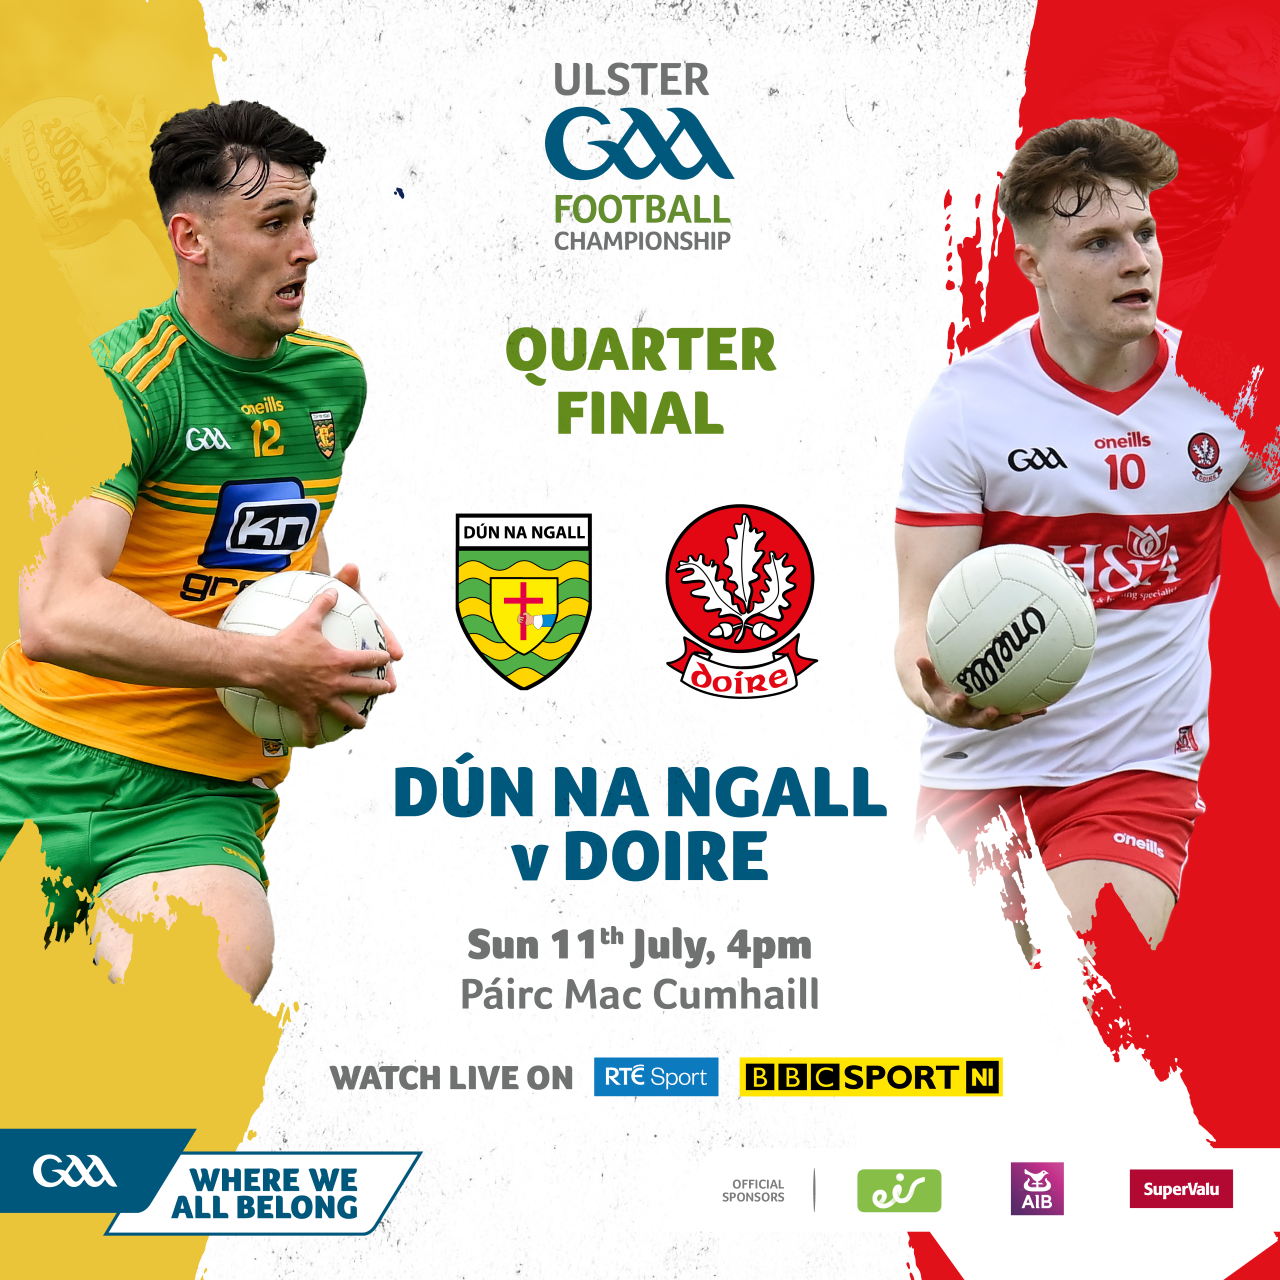 Information for supporters at Ulster Football Championship Quarter Finals